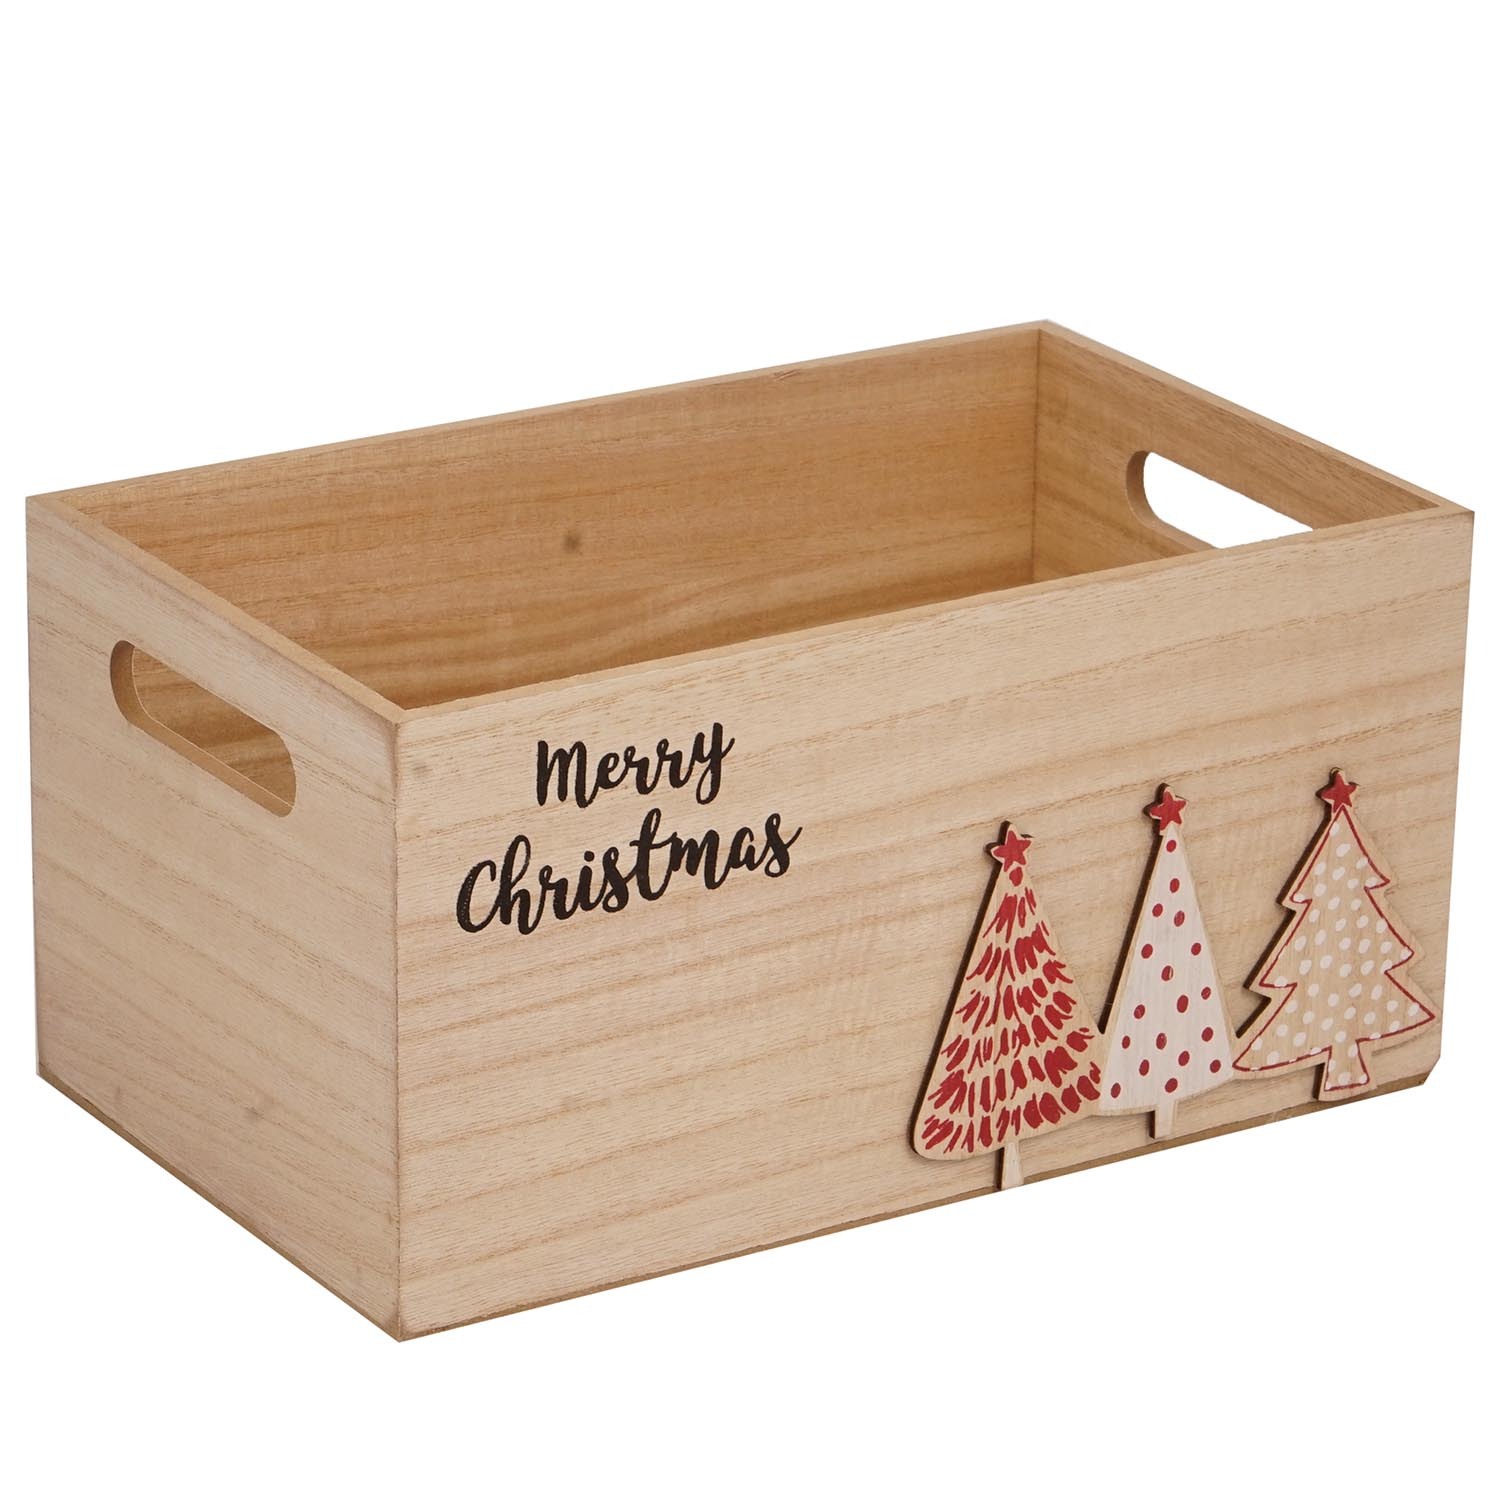 Merry Christmas Wooden Crate - Natural Image 2